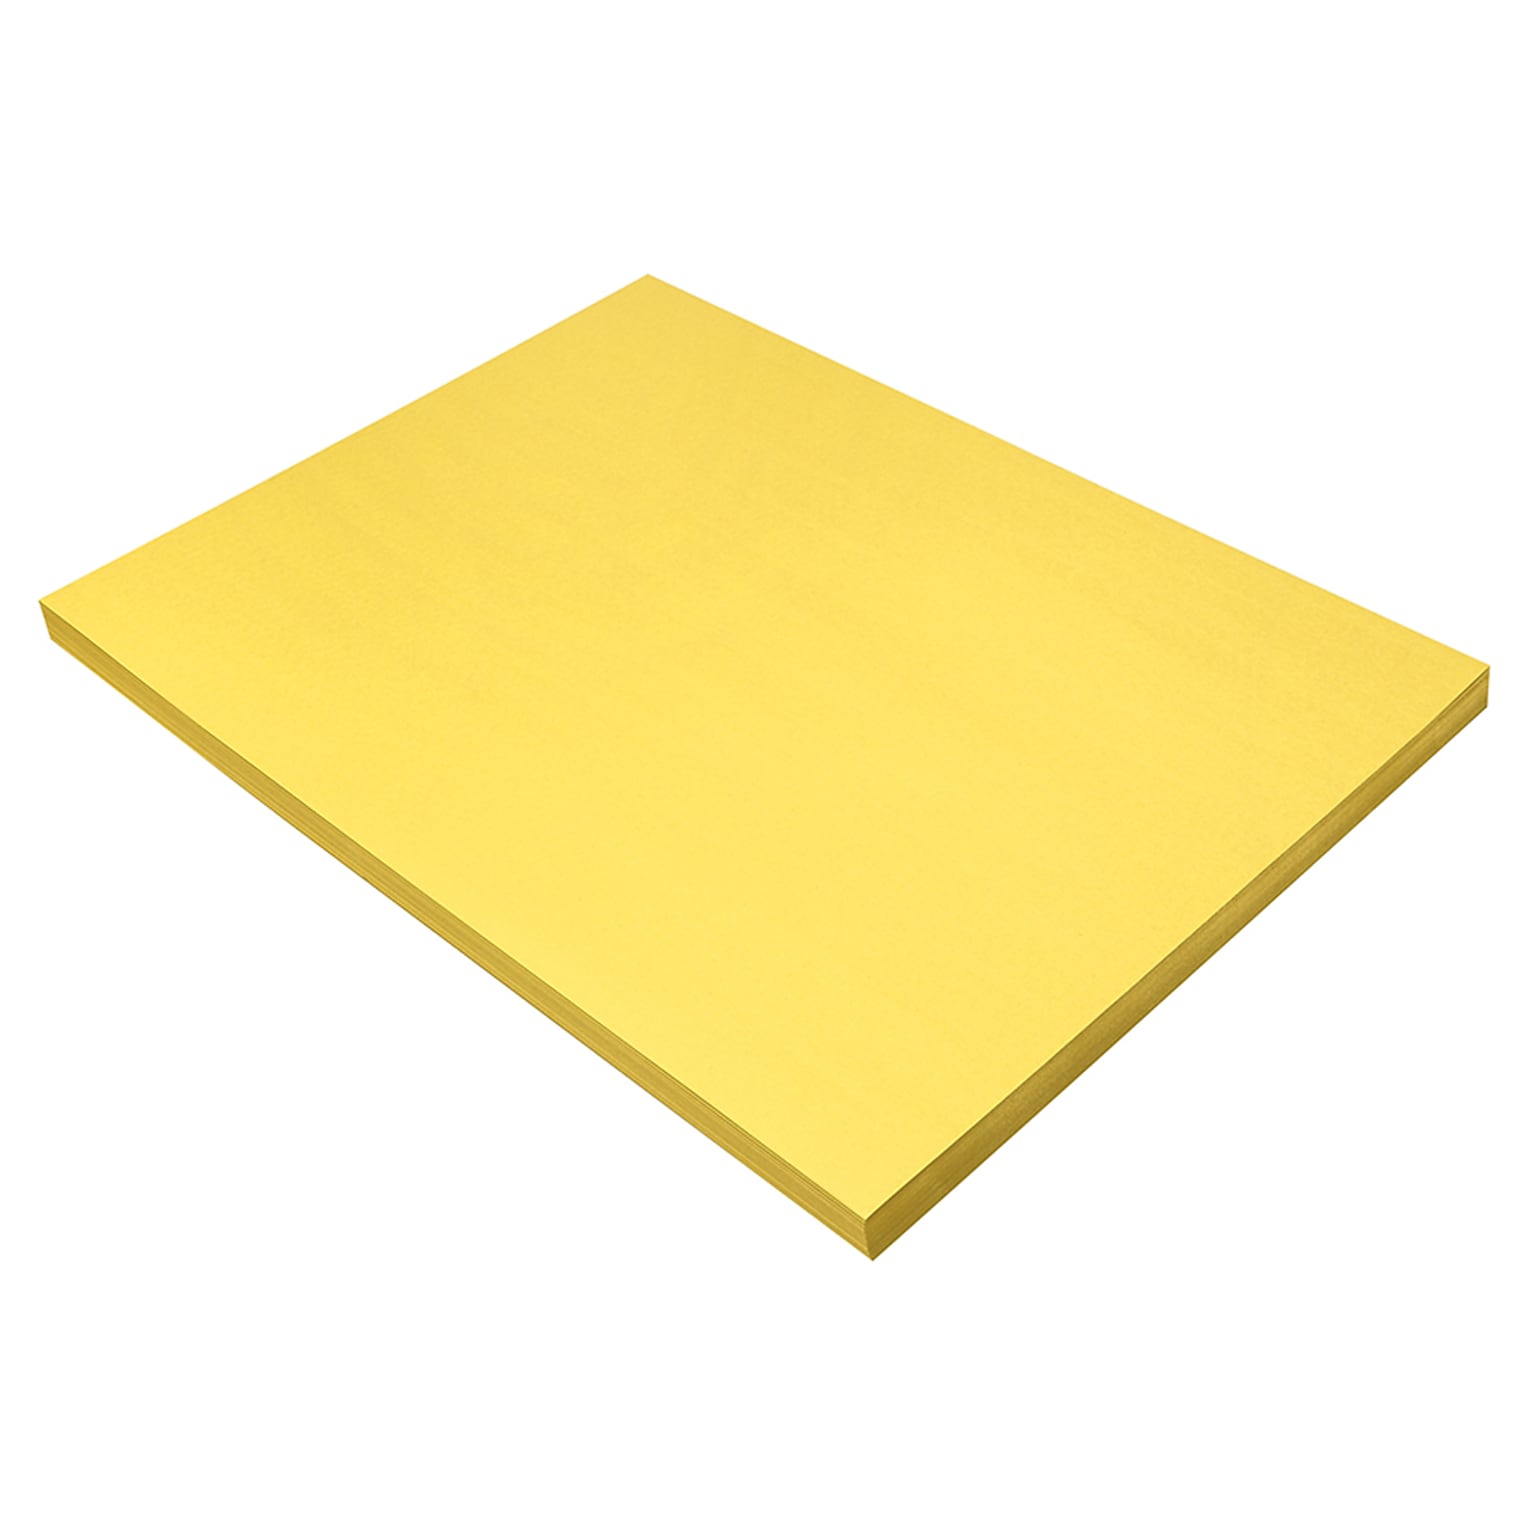 Pacon SunWorks 18 x 24 Construction Paper, Yellow, 100 Sheets (PAC8418)